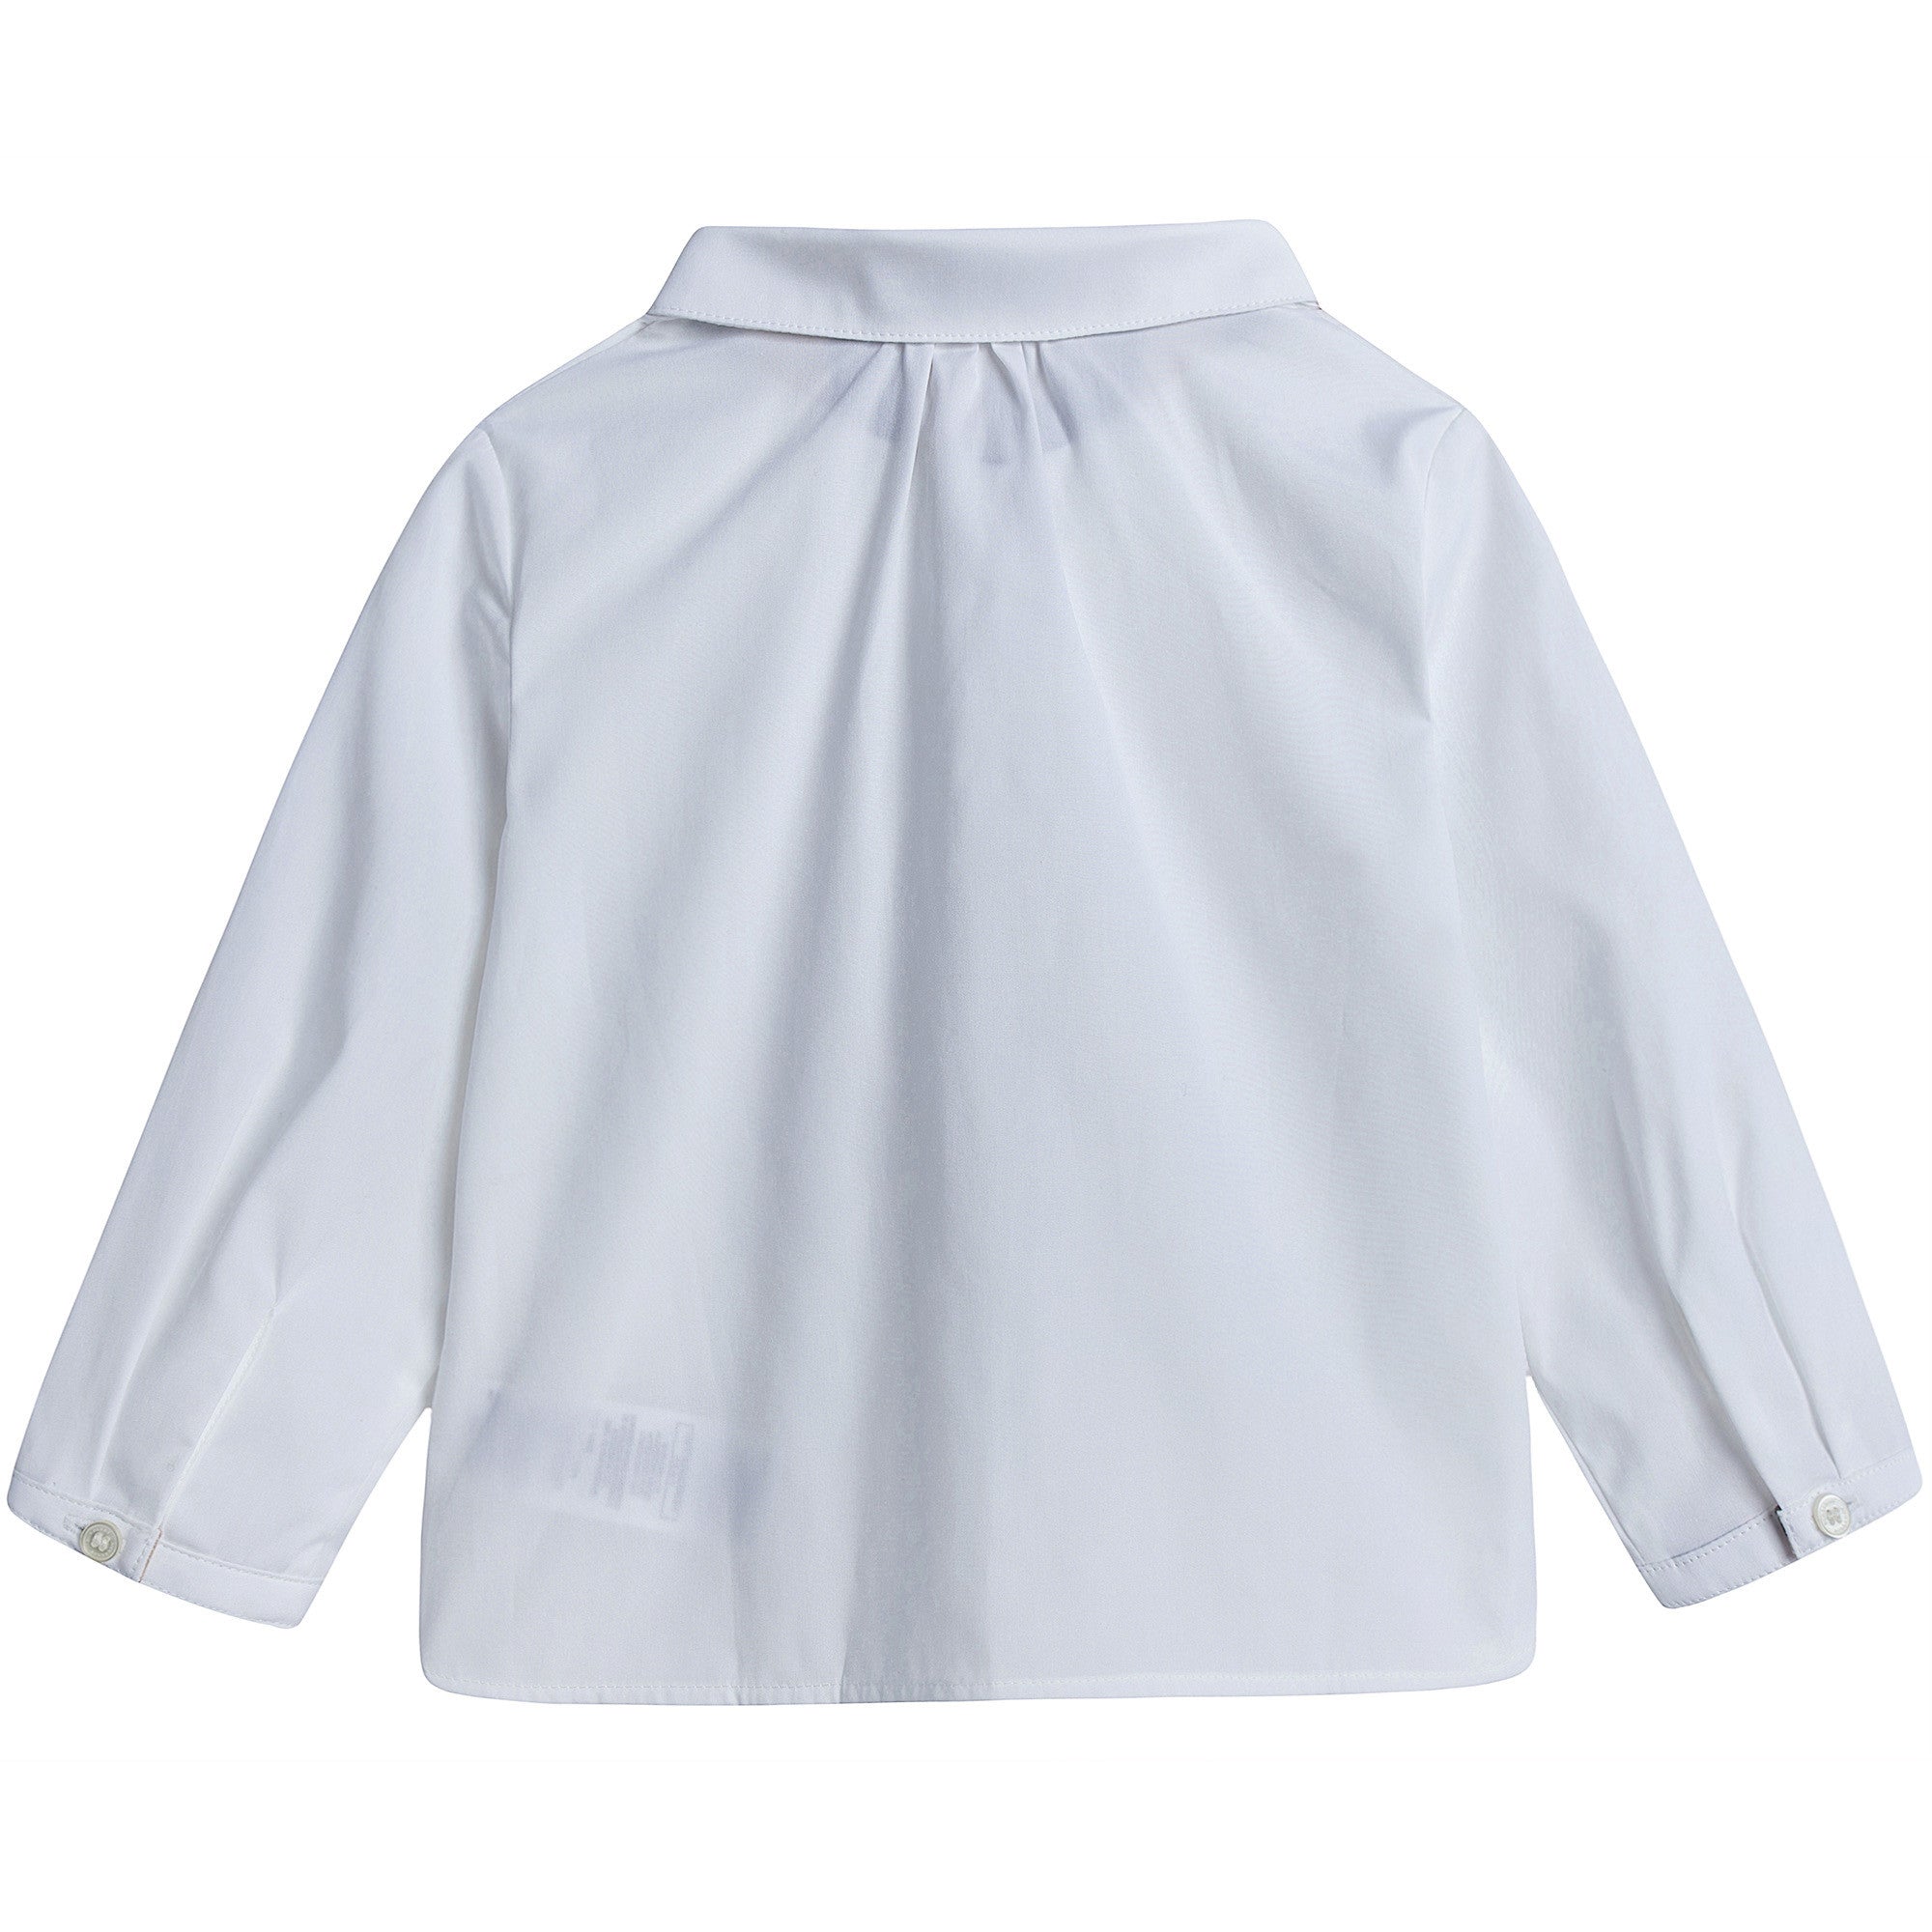 Baby Girls White Blouse with Check Cuffs - CÉMAROSE | Children's Fashion Store - 2